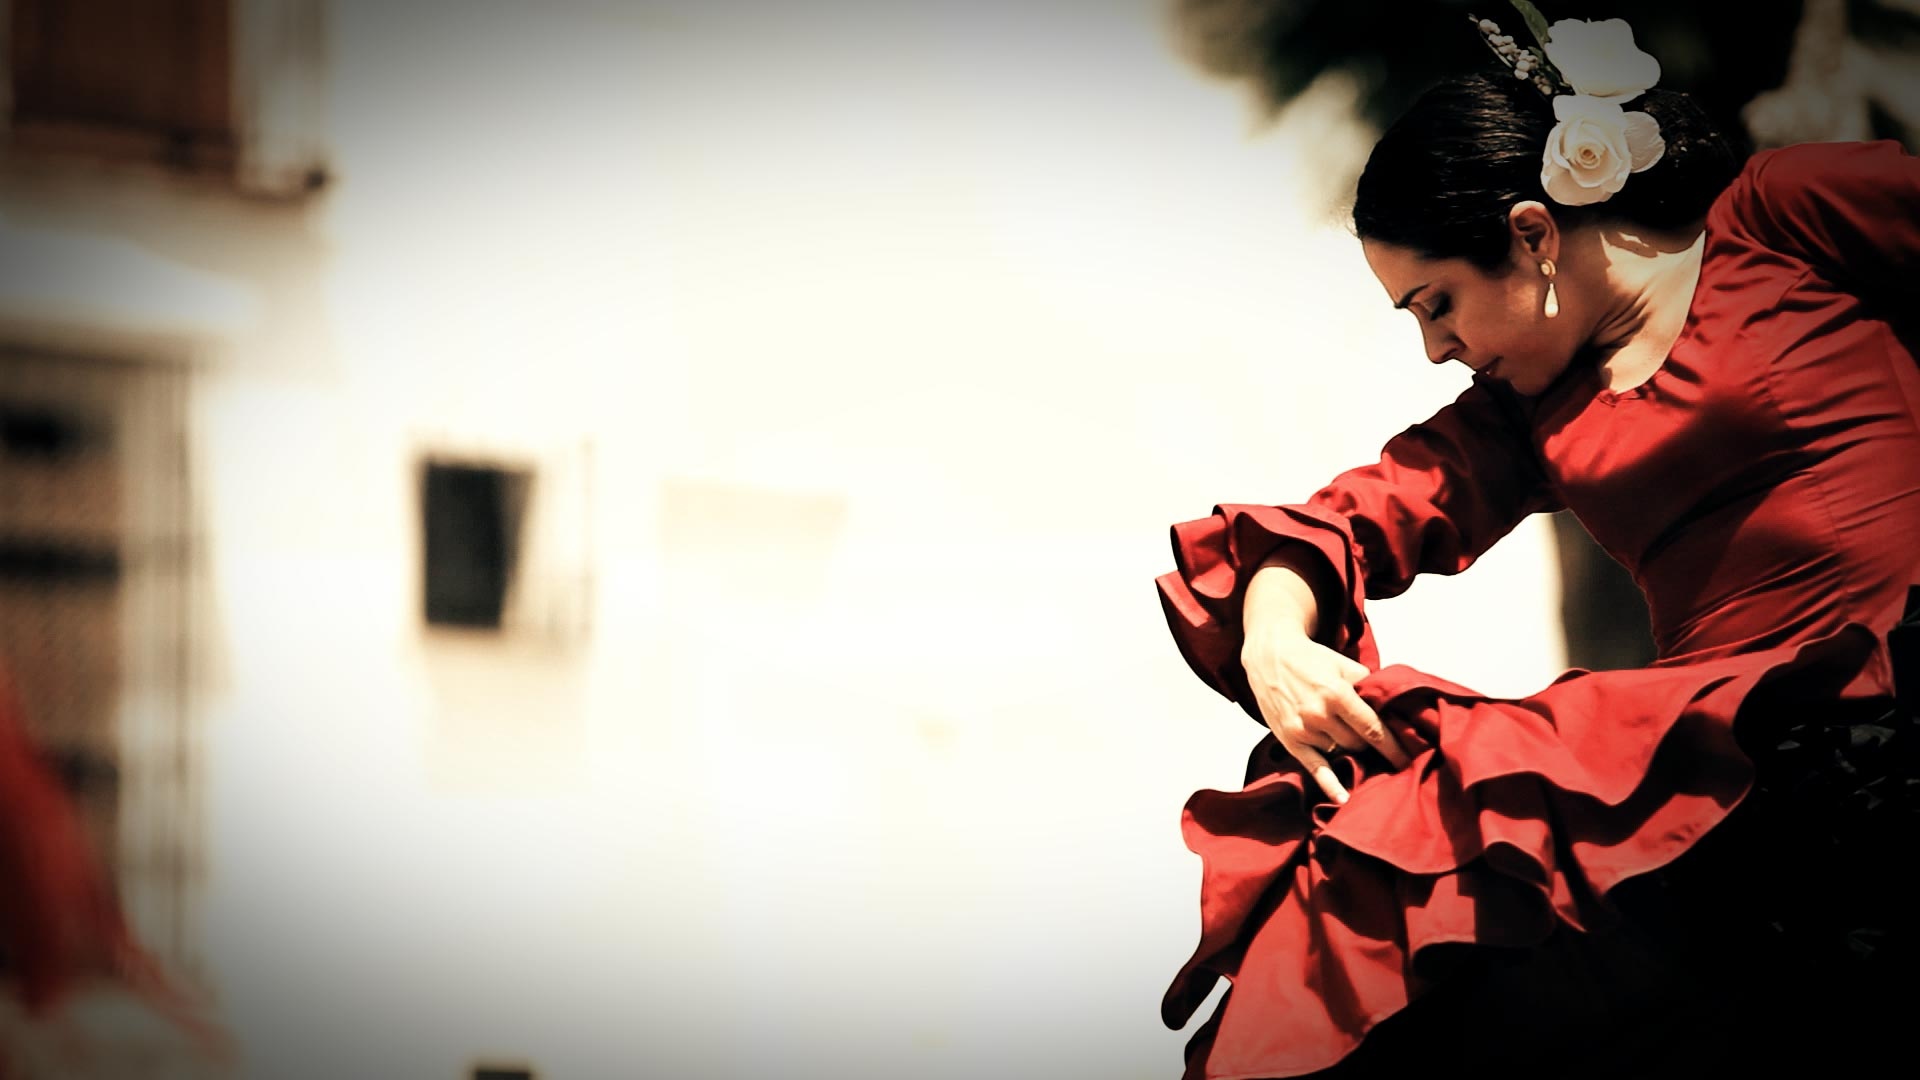 Flamenco: The folkloric dancing outfit, Layers of ruffles on both the skirt and sleeves, Female dancer. 1920x1080 Full HD Background.